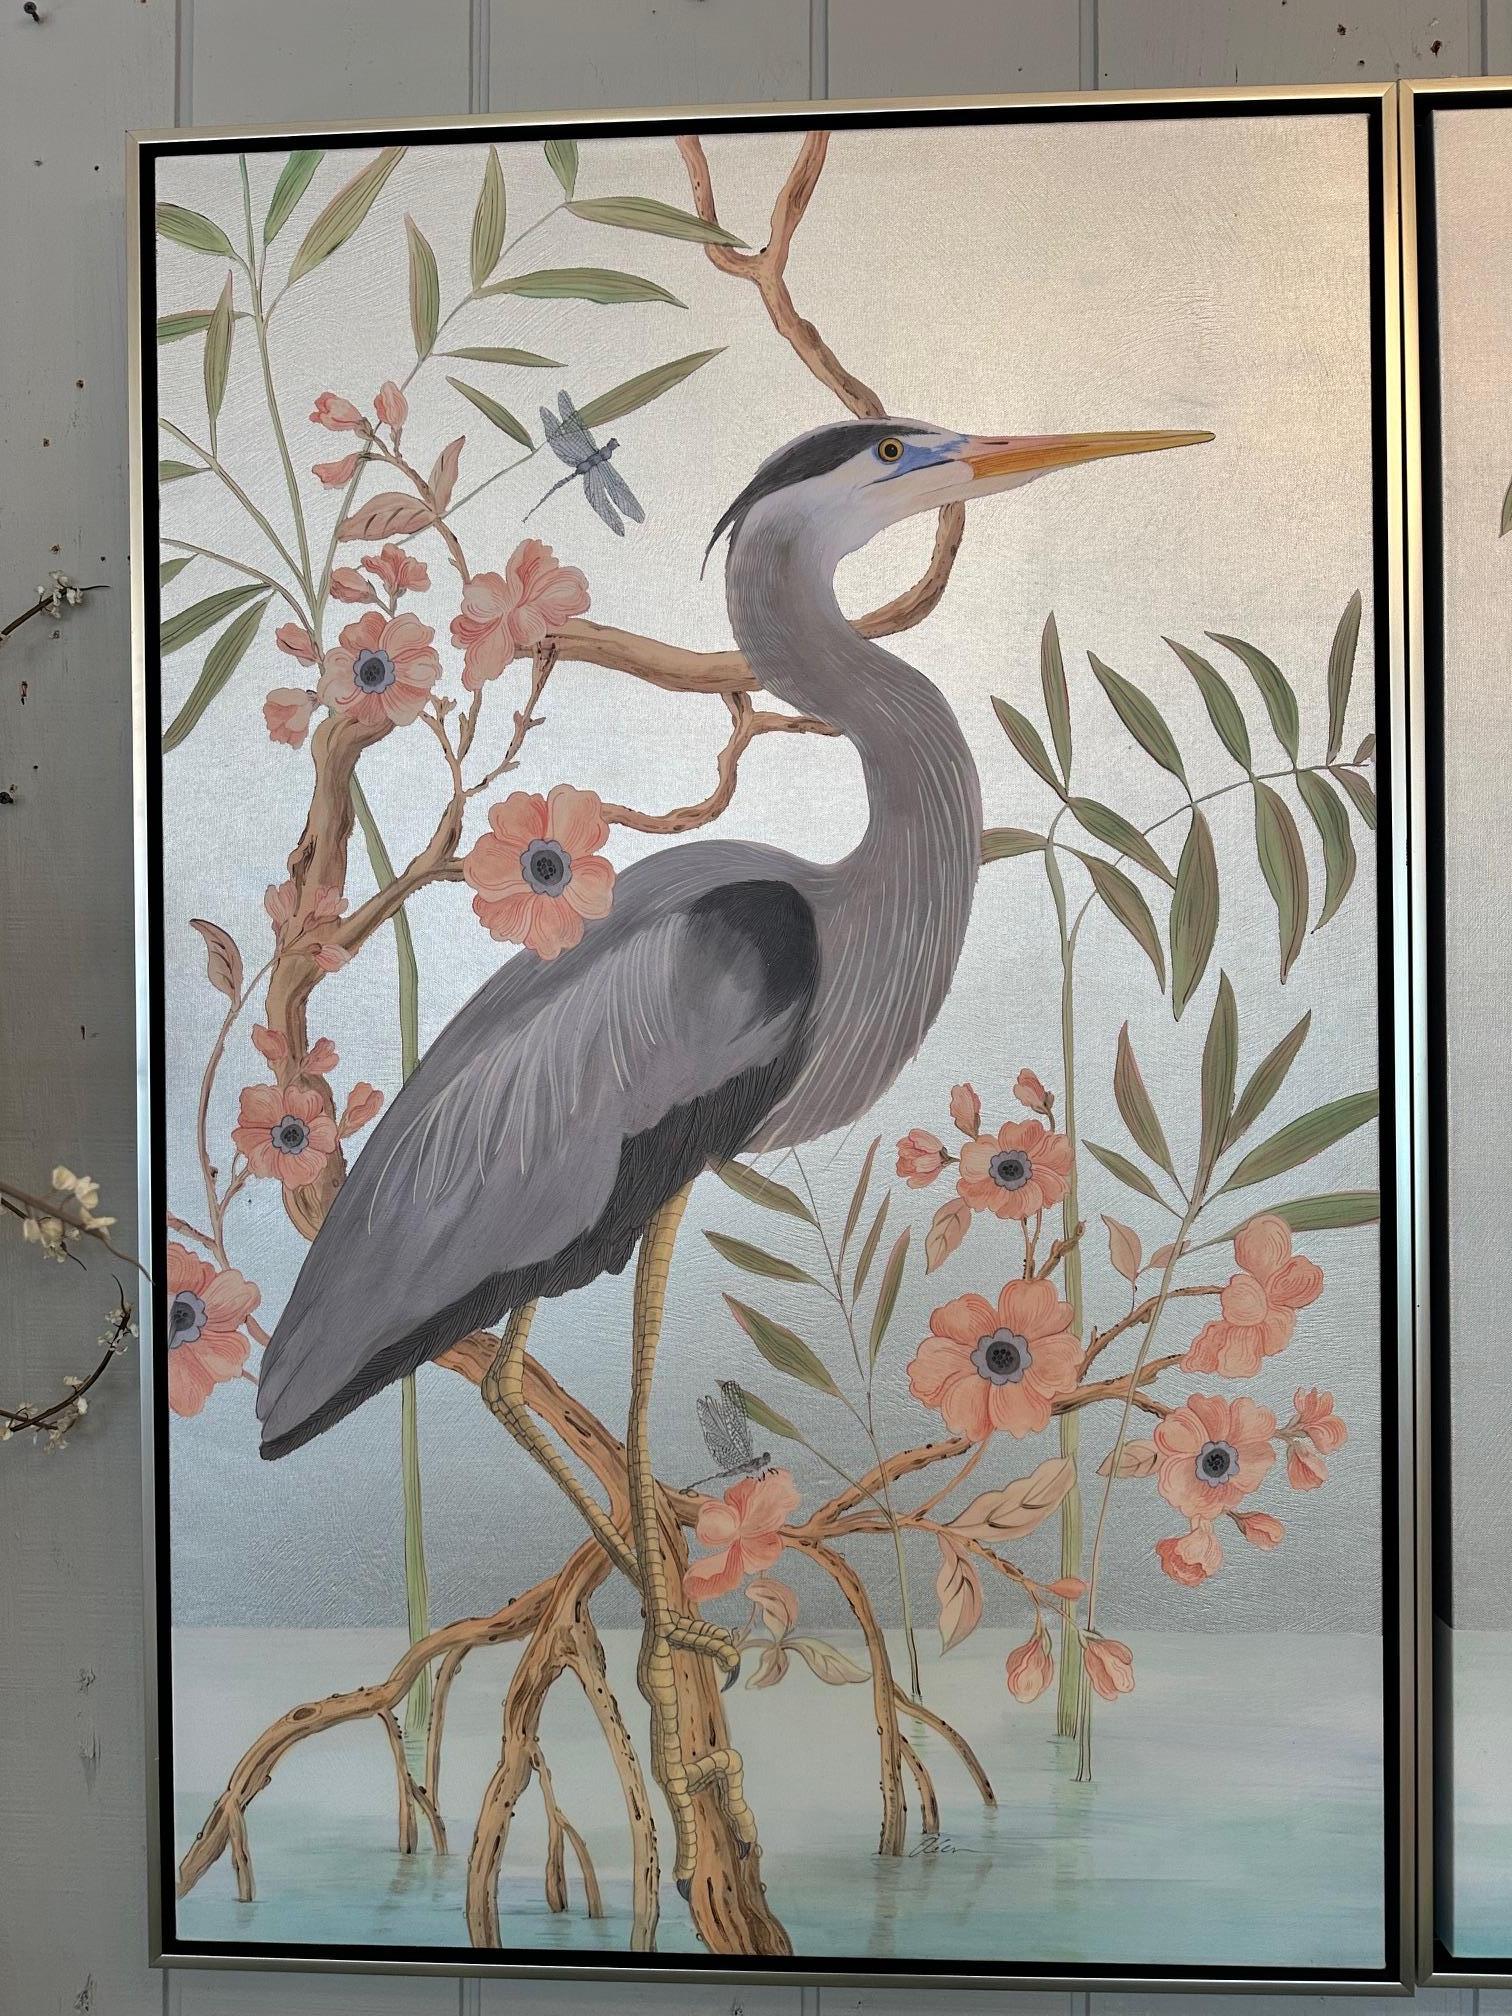 Impressive large pair of elegant paintings of grey shore birds having an Oriental feel in muted color palette of light green, silver greys, celadon and light terracotta.  Gorgeous details and soft peaceful vibe.  Signed.  Love the dragonflies!